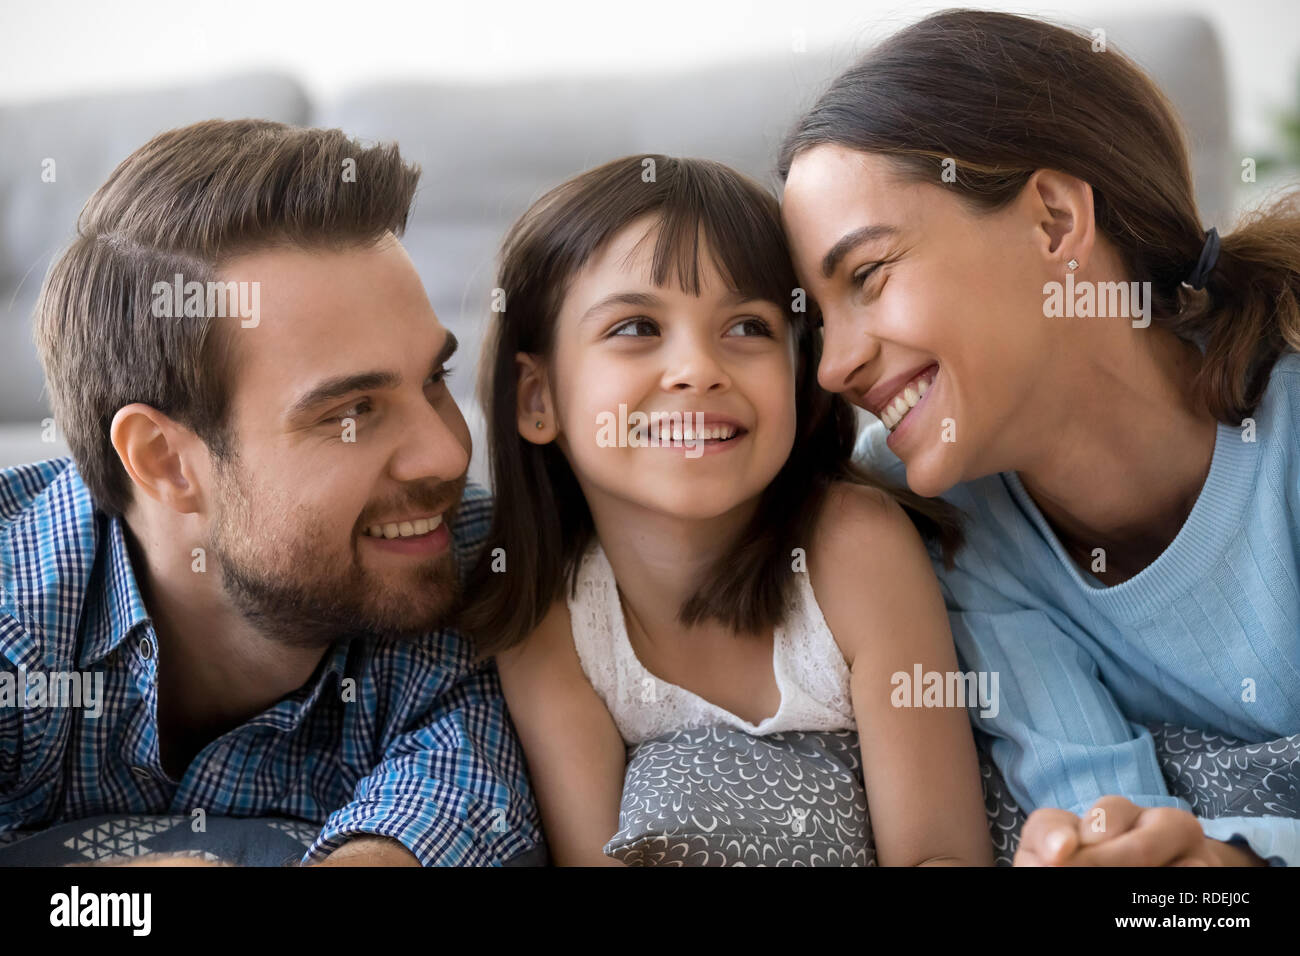 Child girl feeling happy having fun with loving caring parents Stock Photo